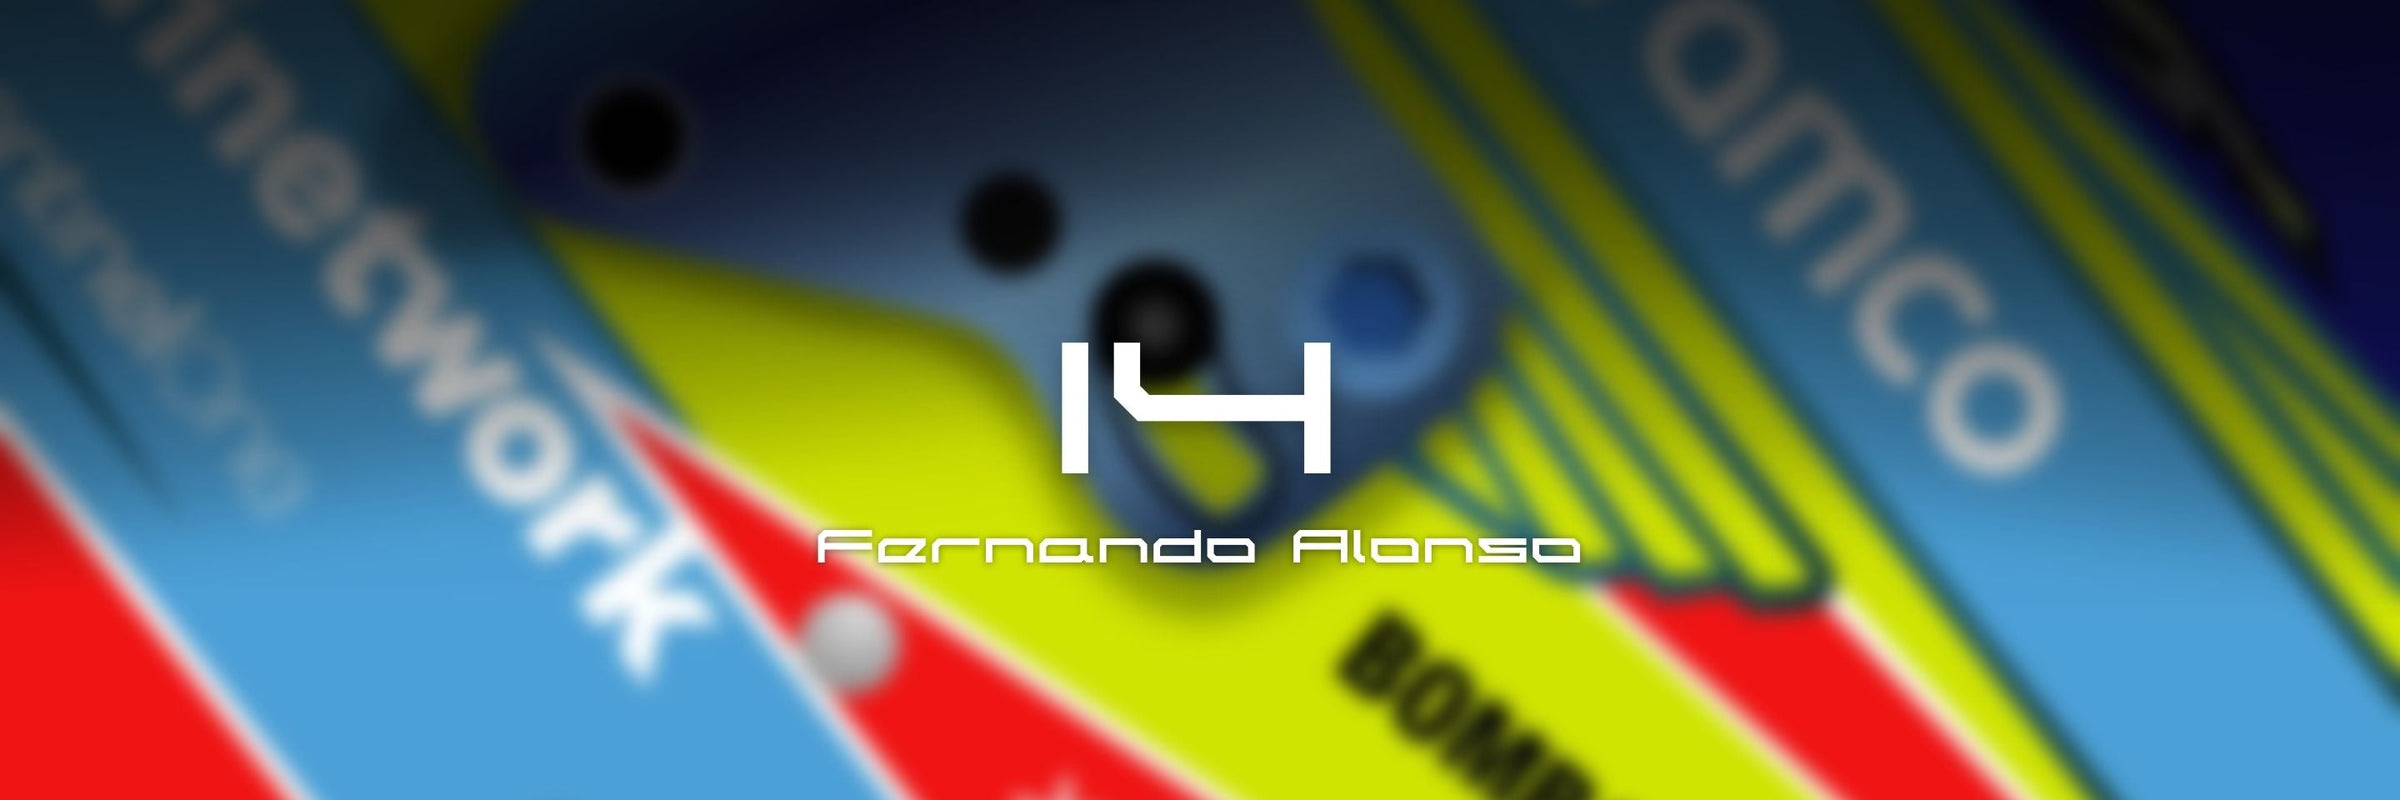 Fernando Alonso - F1 and Motorpsort Offficial Merchandise - Fueler store